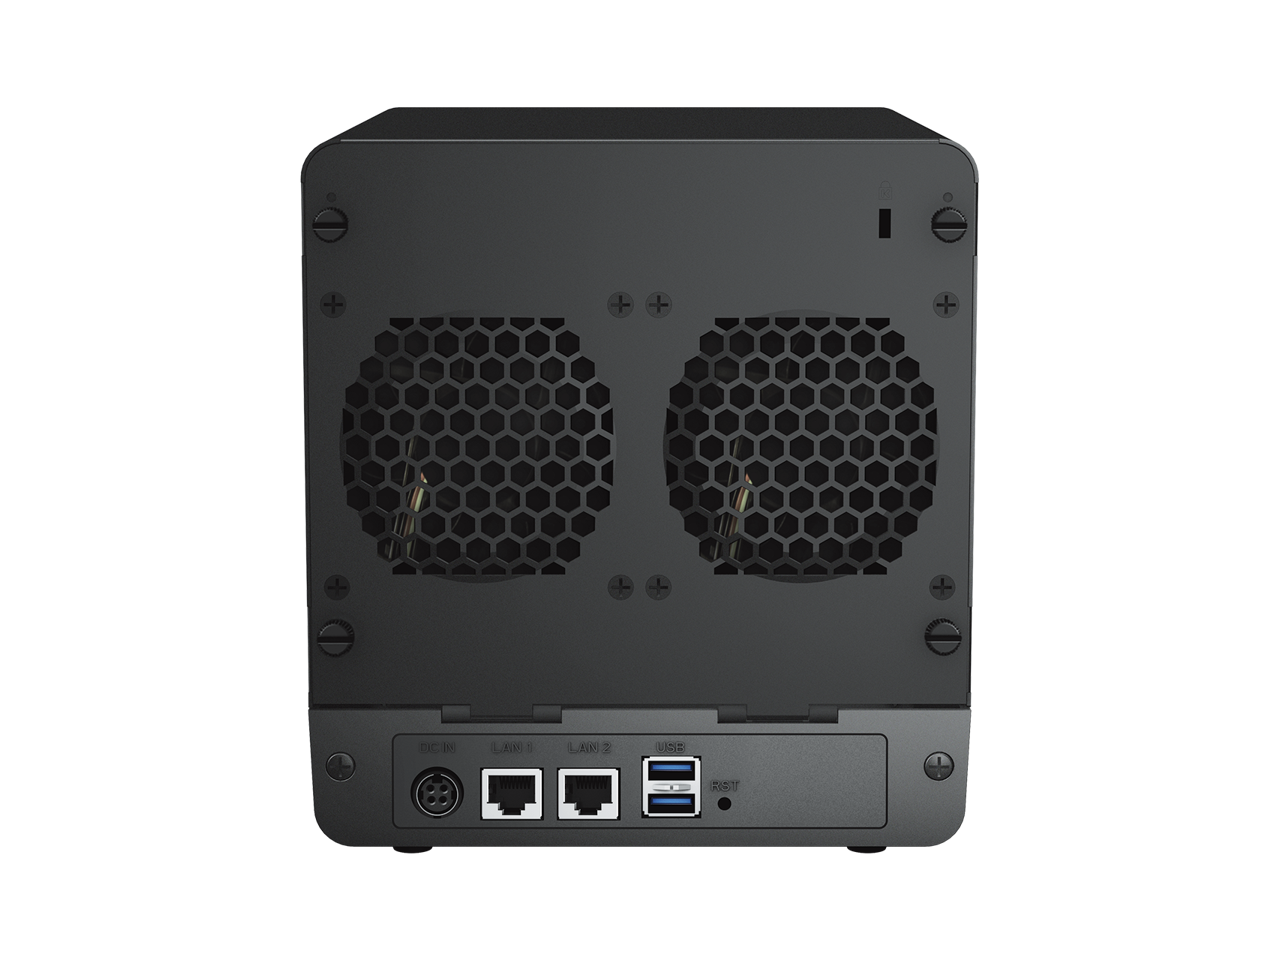 Synology DS423 4-Bay NAS with 2GB RAM and up to 48TB of Seagate Ironwolf NAS Drives Fully Assembled and Tested